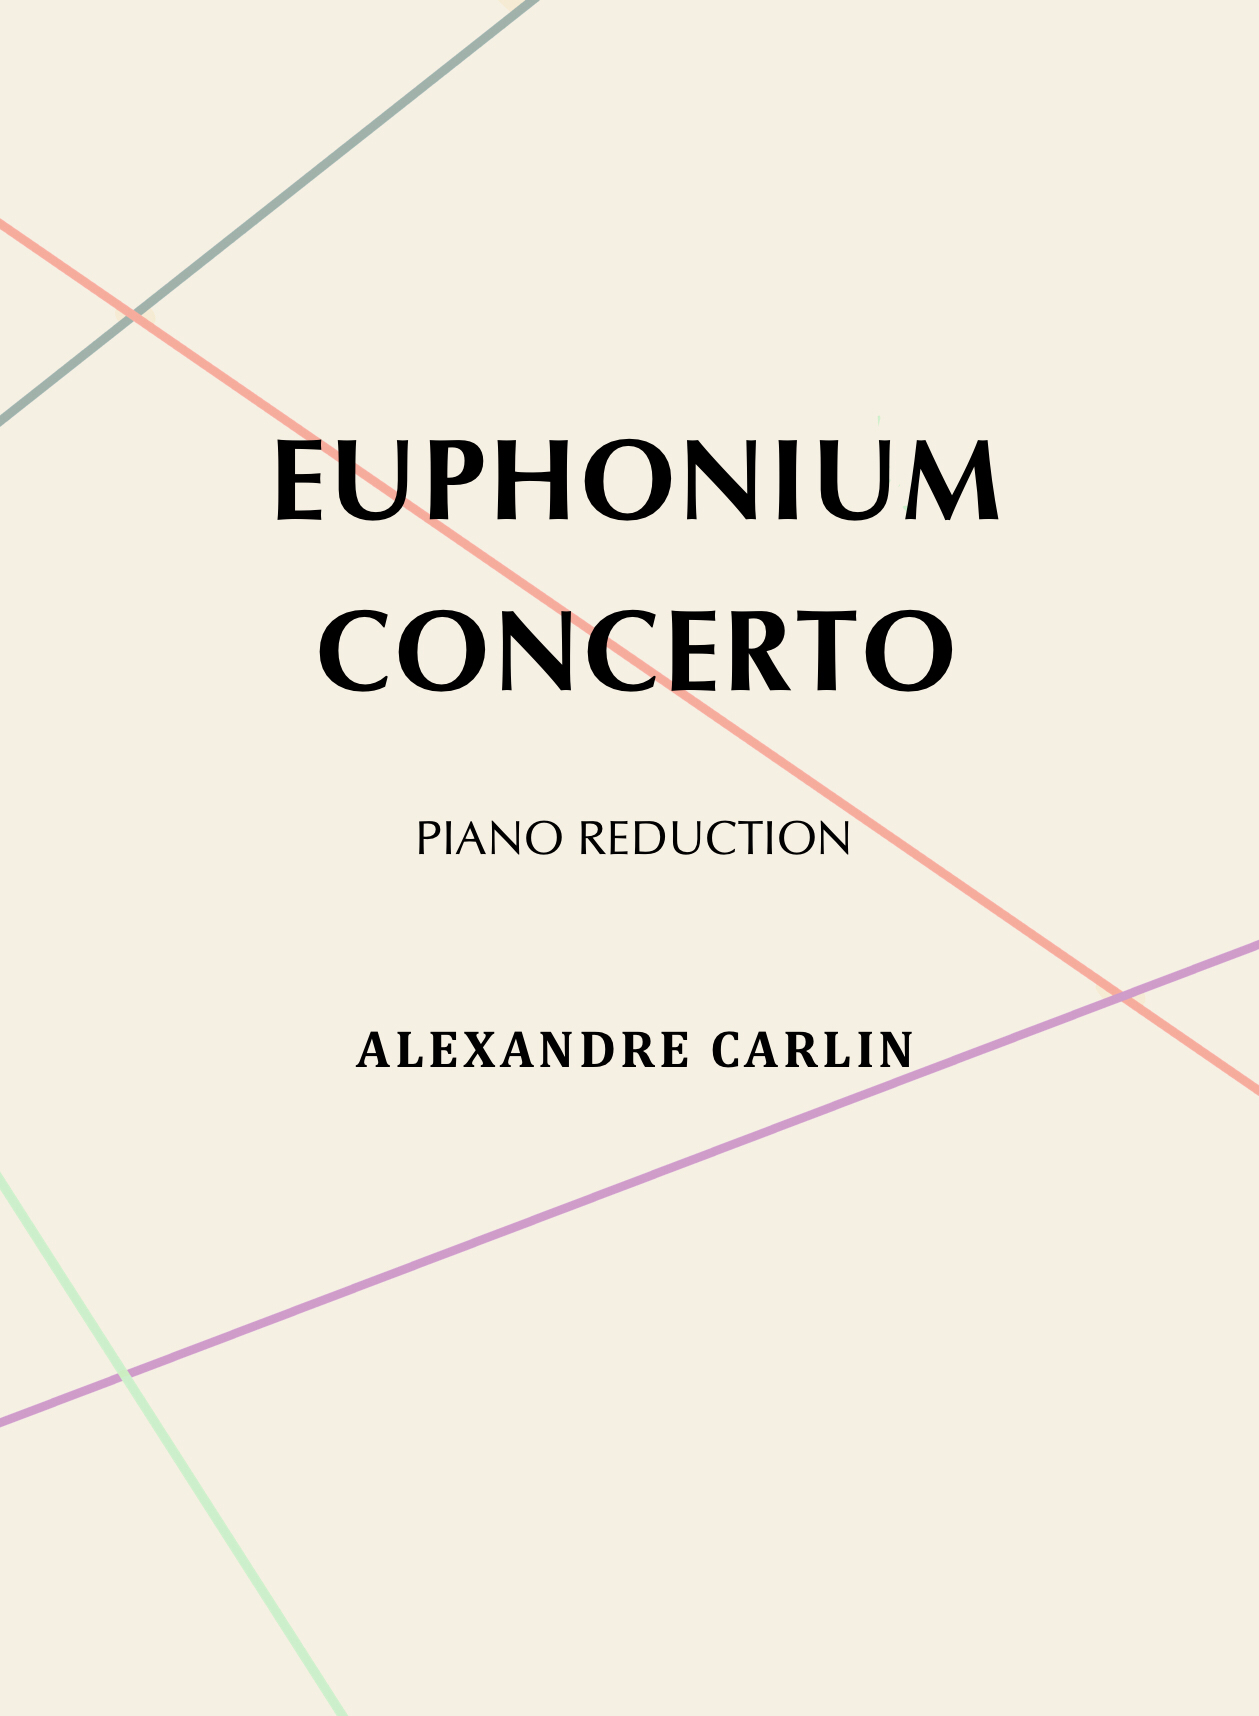 Concerto For Euphonium, Piano Reduction by Alexandre Carlin